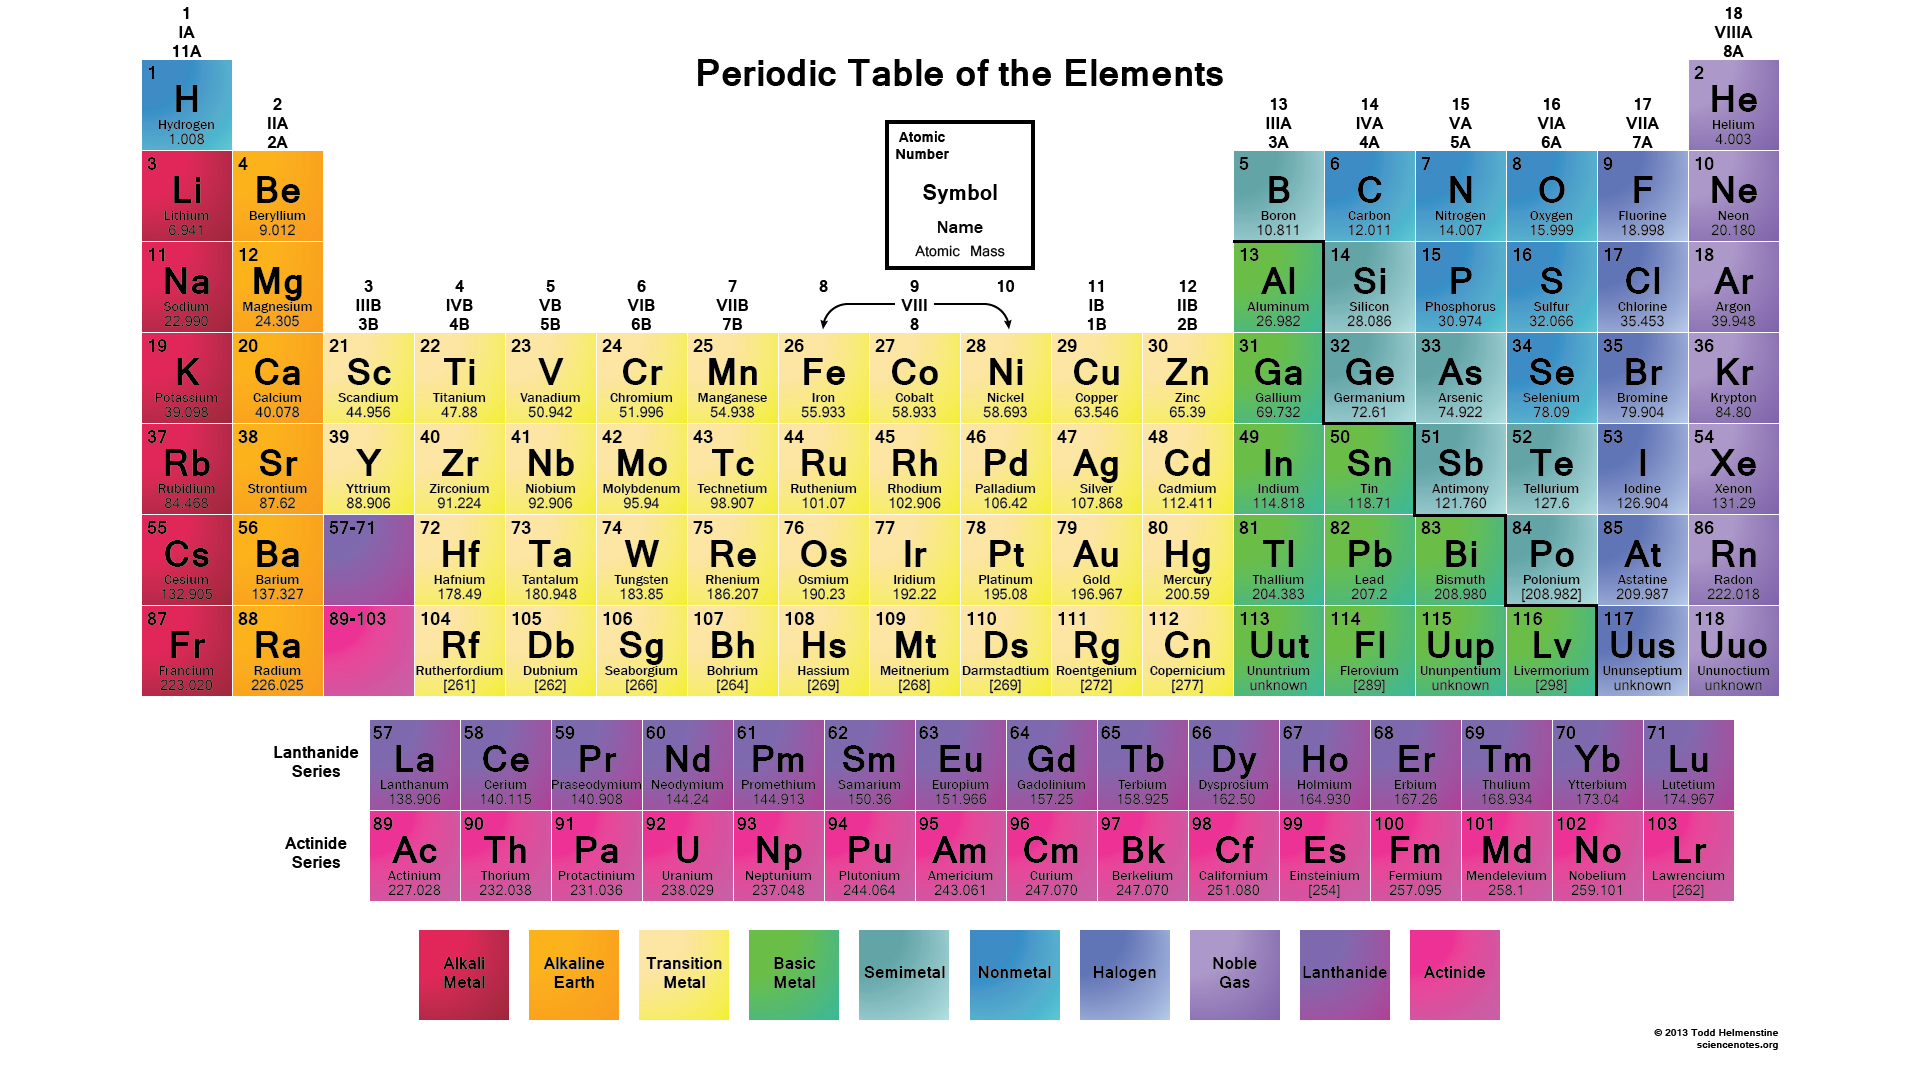 where are metals located on the periodic table